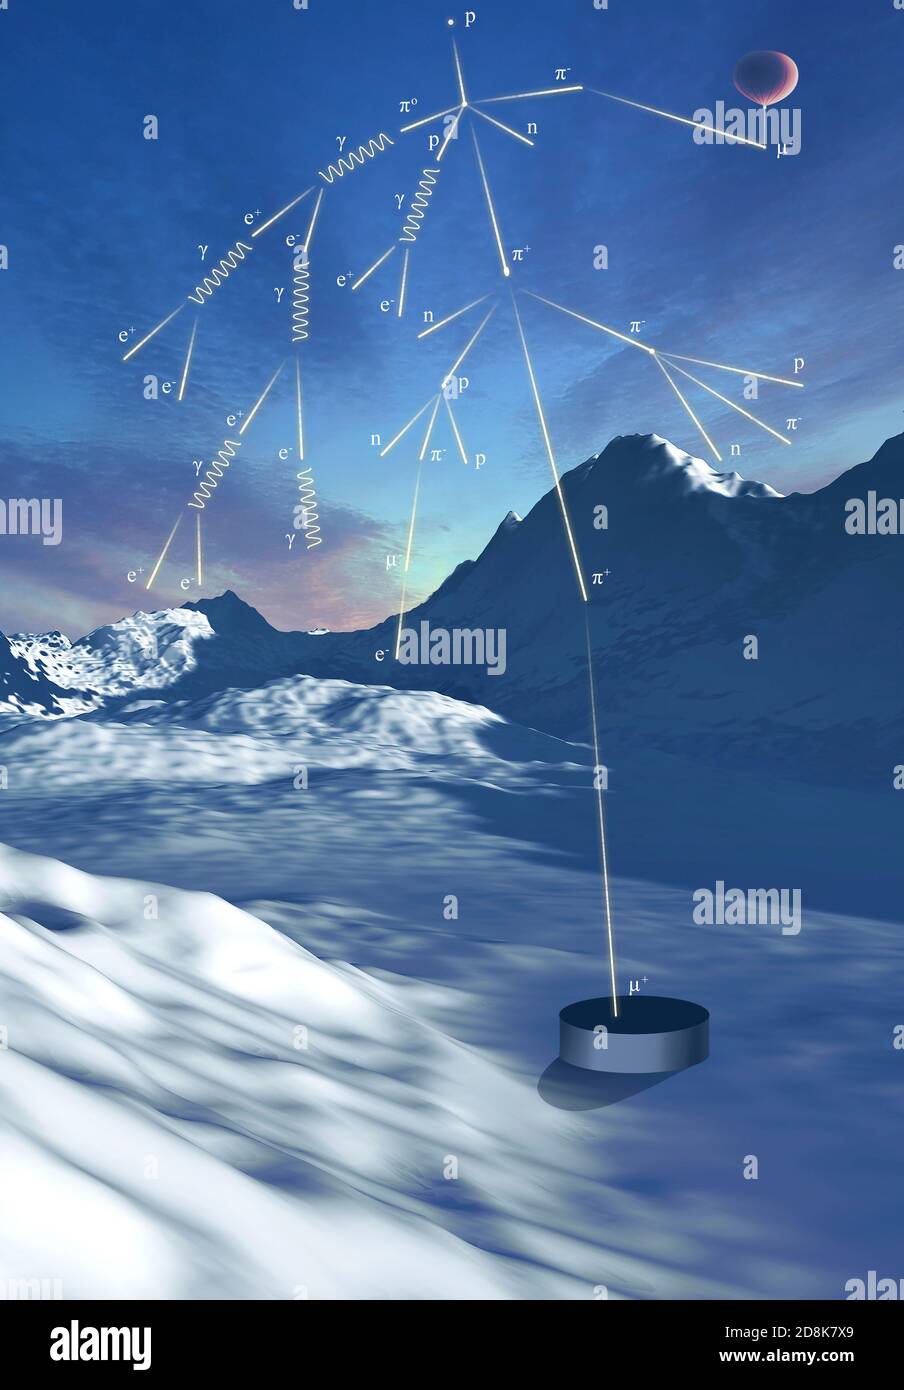 Cosmic rays. Artwork of high-energy particles and radiation from a star in deep space (cosmic rays) impacting molecules and atoms in the Earth's atmosphere. These primary impacts cause a secondary cascade of subatomic particles. Detection and analysis of these particles, which include protons, Stock Photo